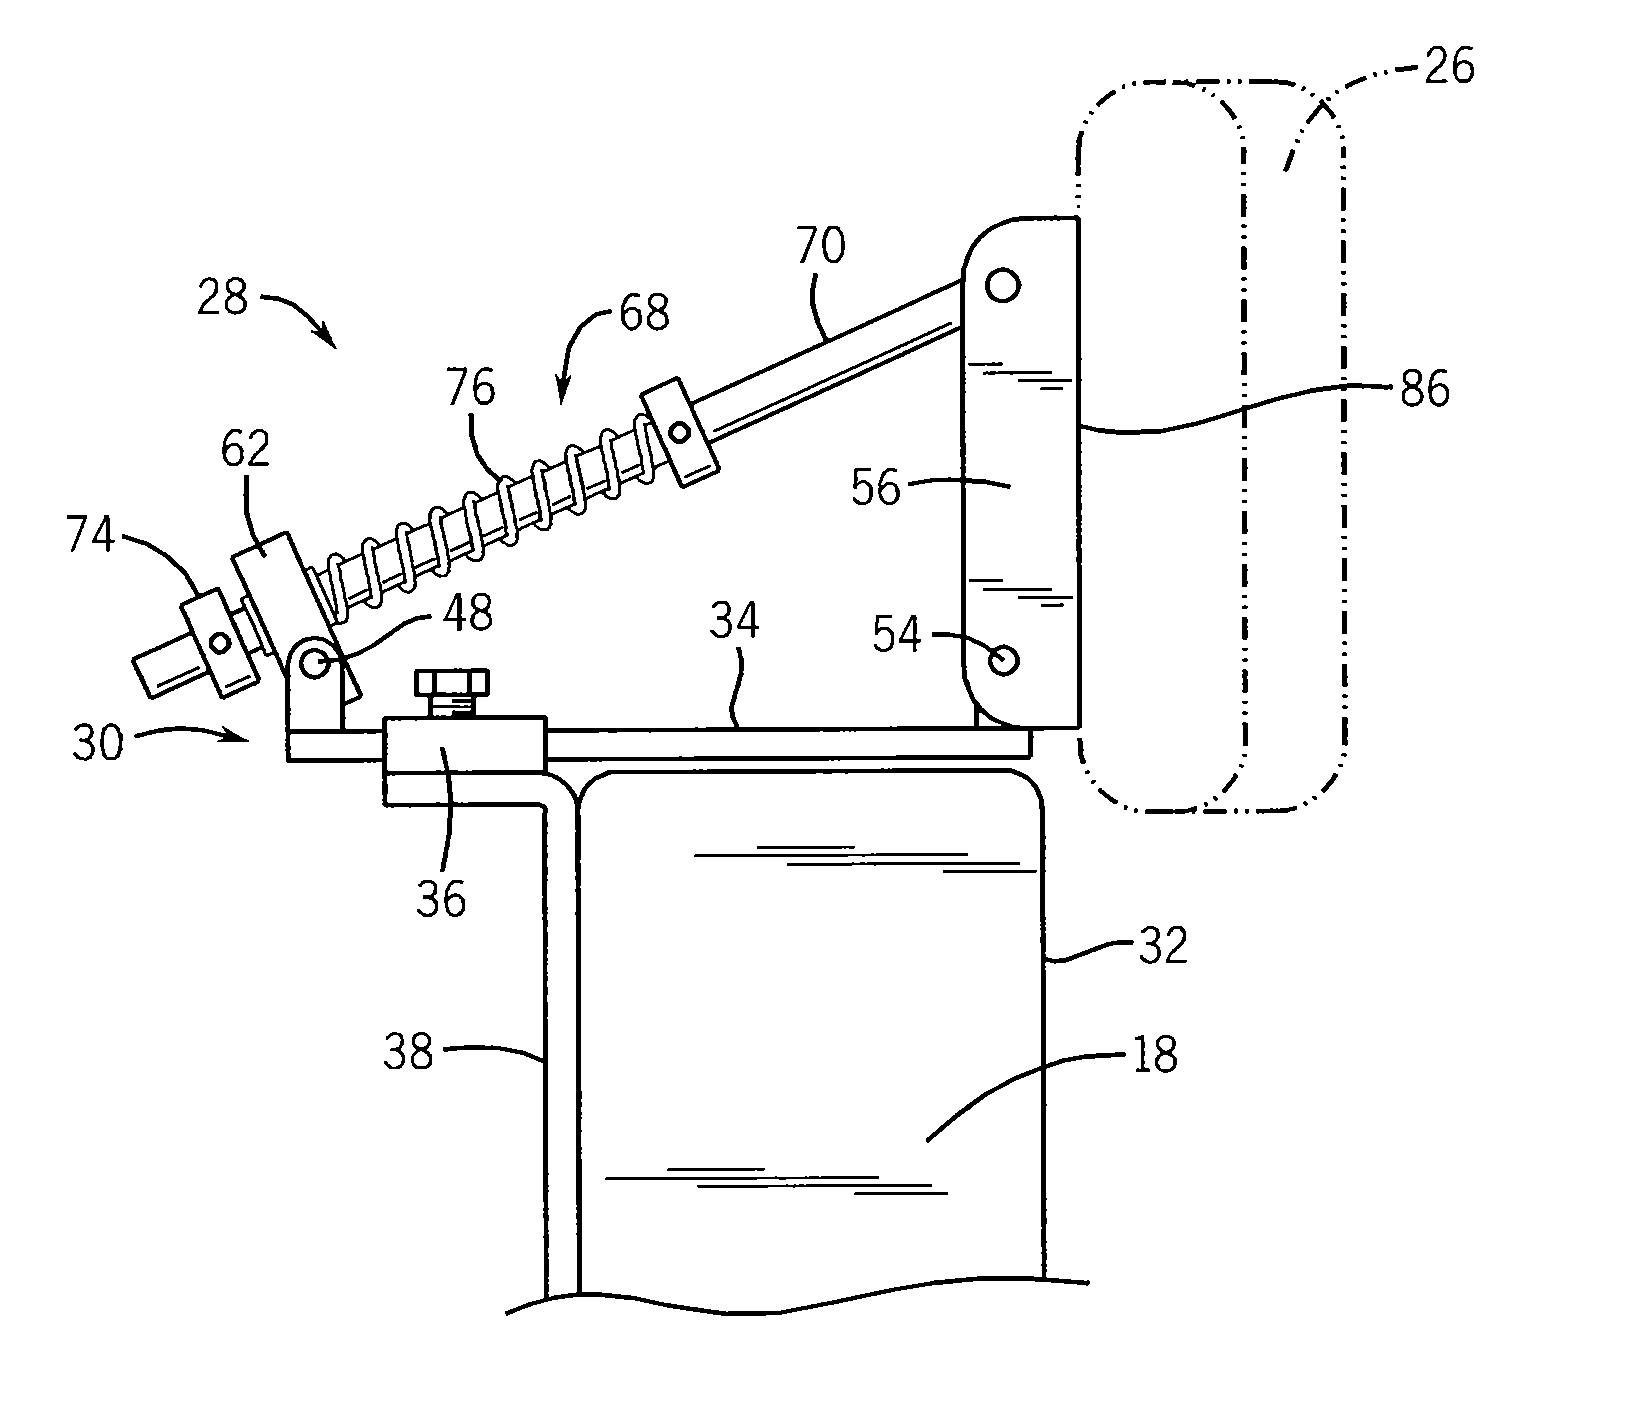 Reactive headrest system for disabled individuals